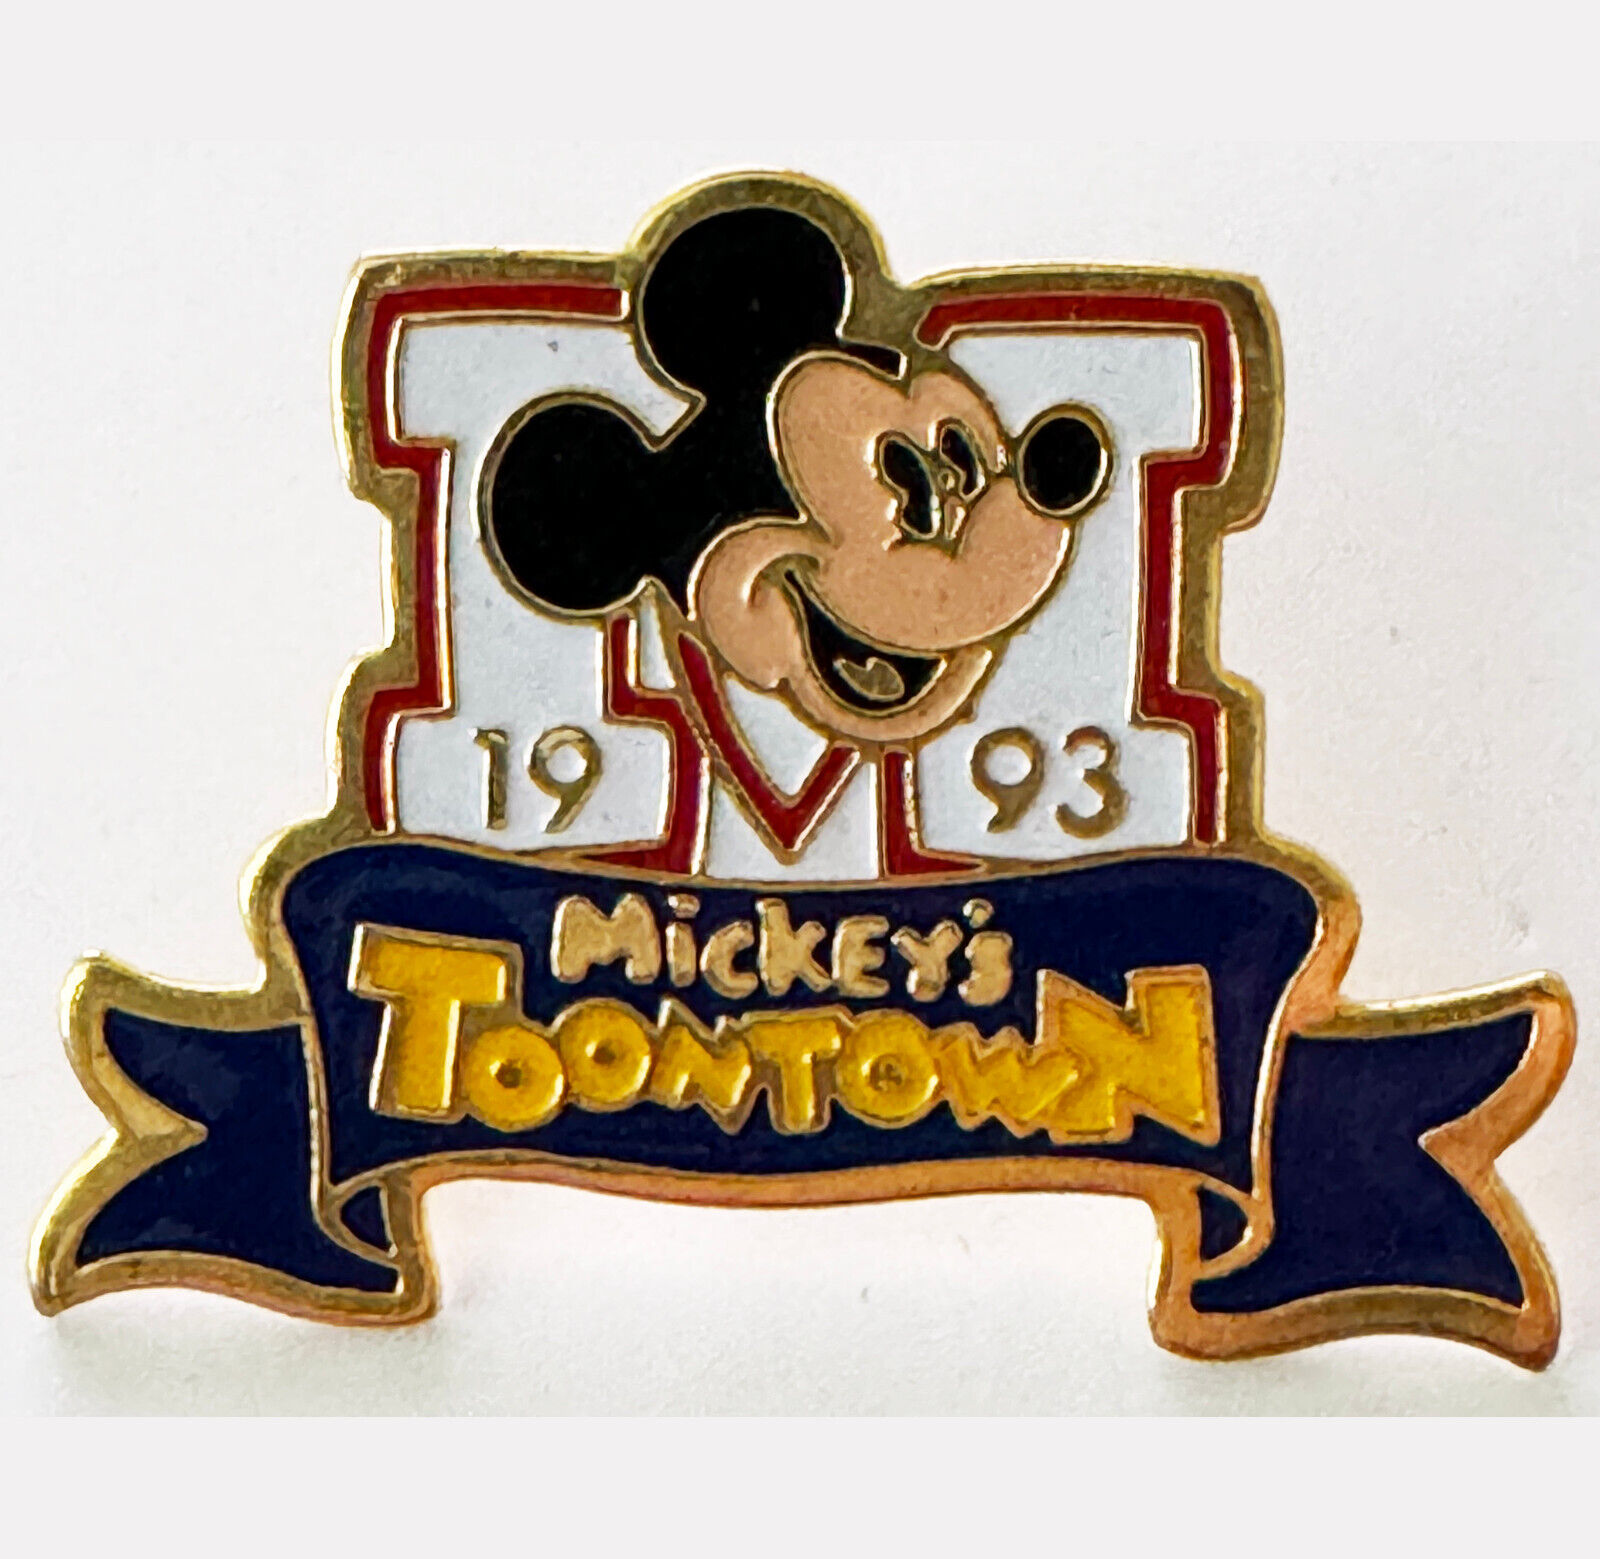 Vintage Disneyland Pin 1993 Cast Excl Mickeys Toontown Opening LE 238 of 550